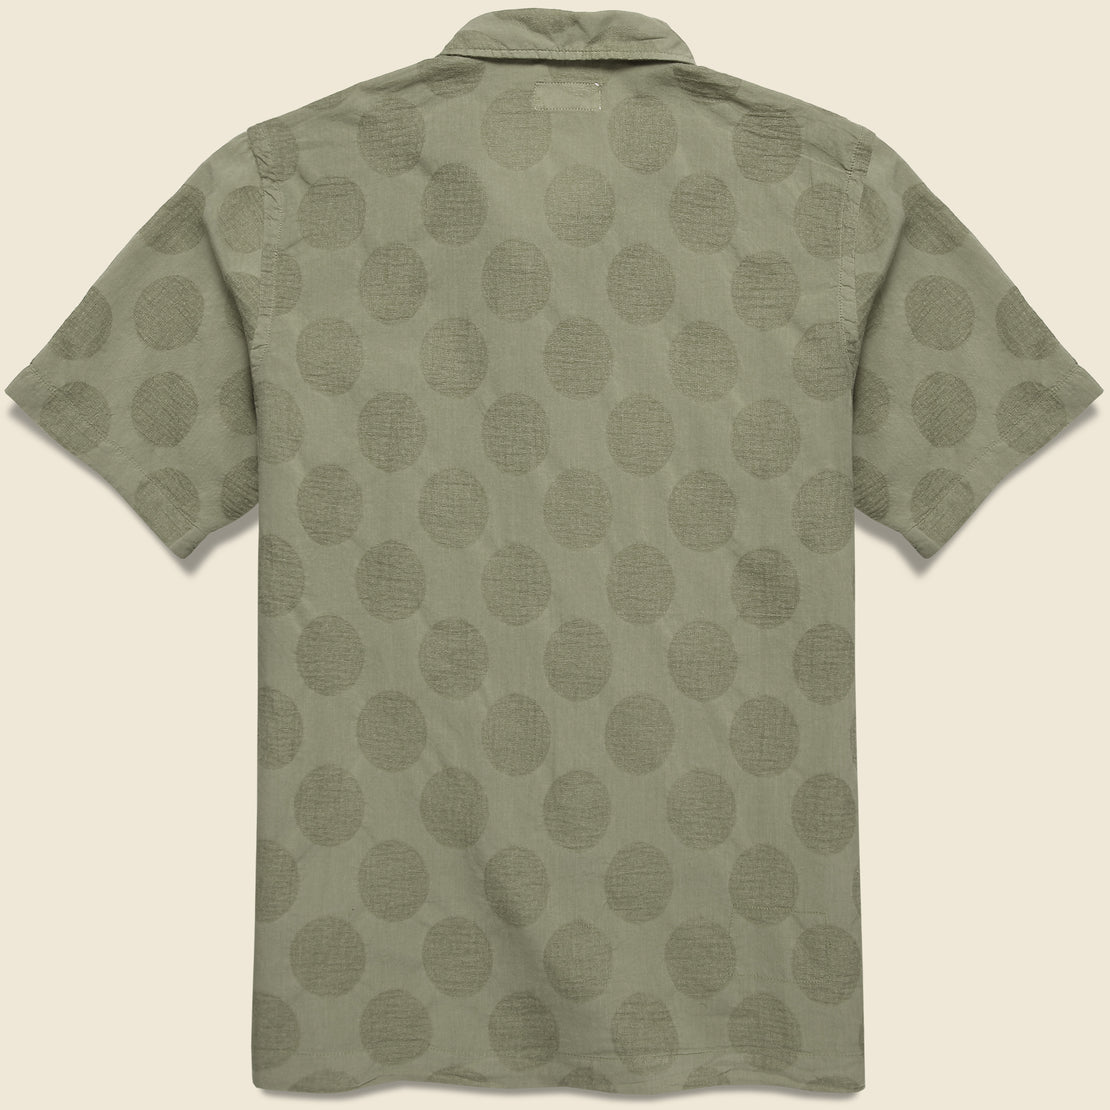 Dot Print Road Shirt - Olive - Universal Works - STAG Provisions - Tops - S/S Woven - Dot